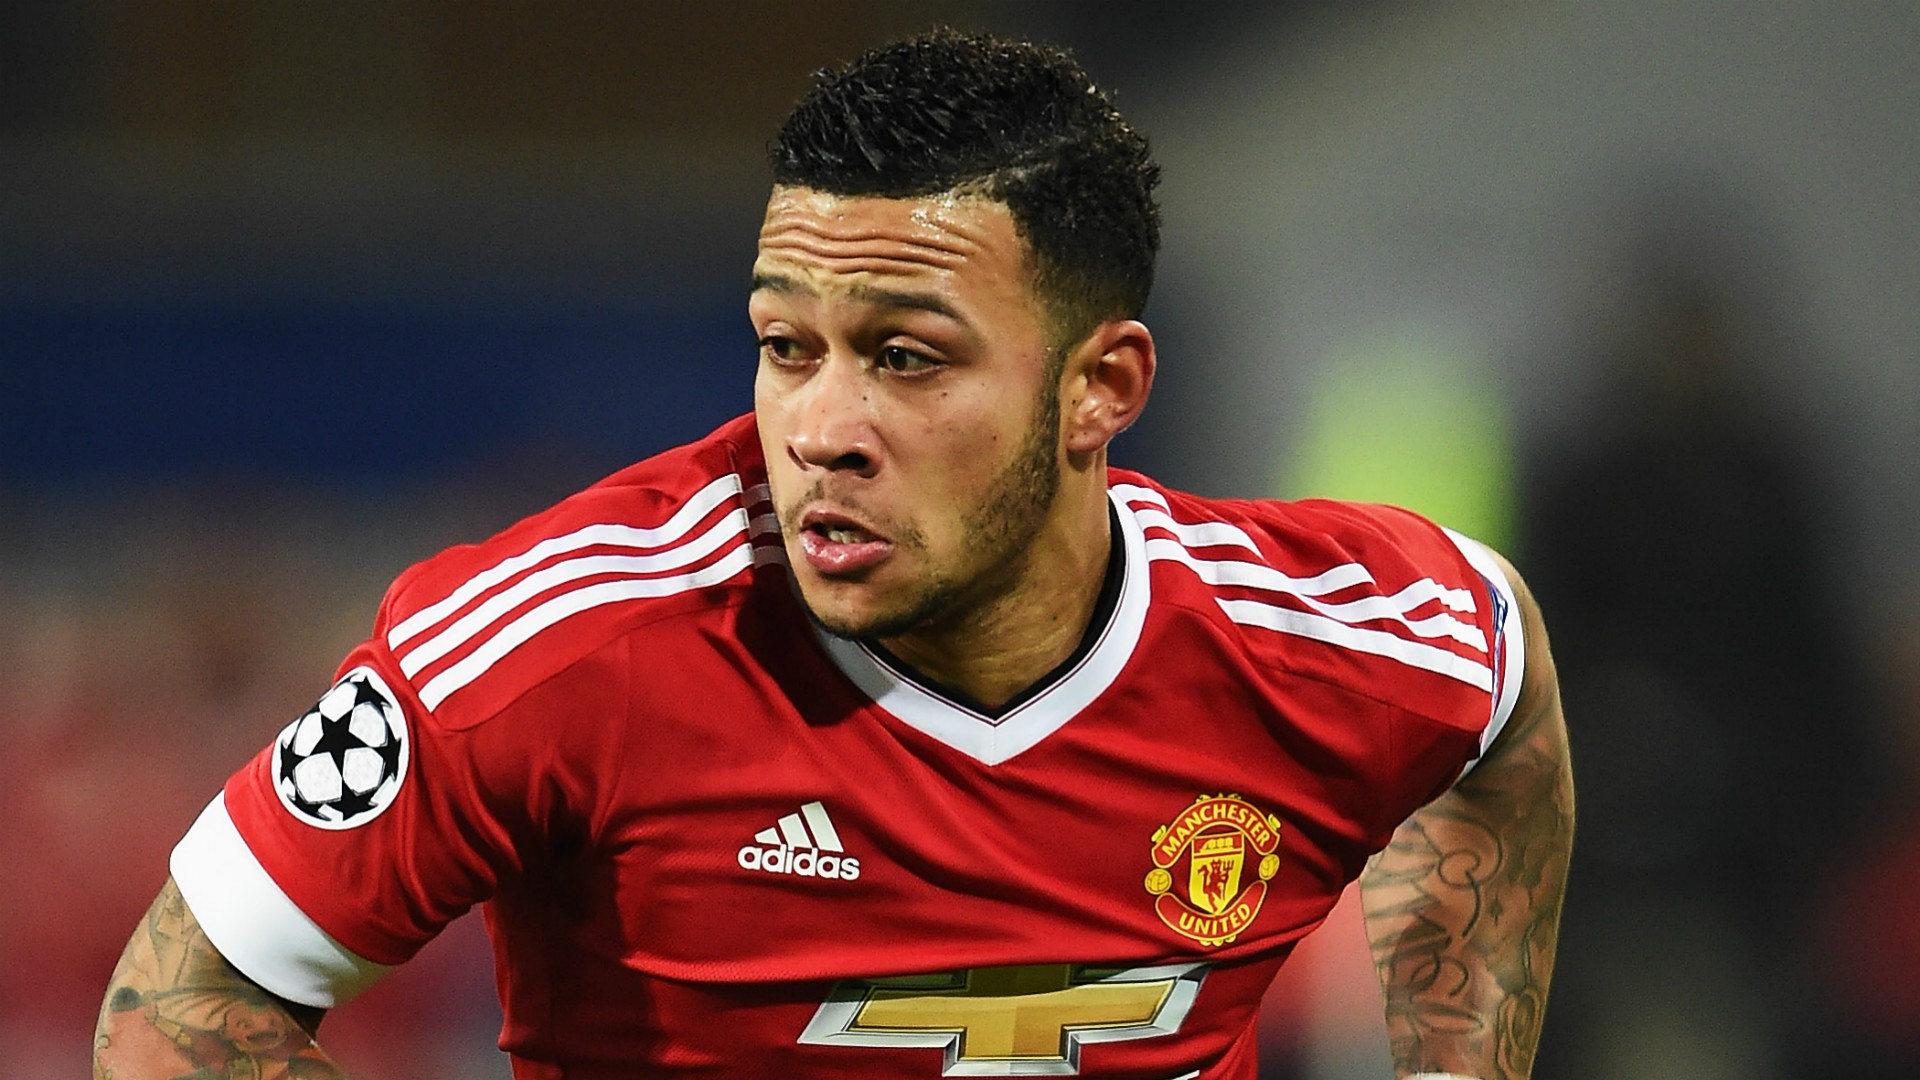 ‘Manchester is still red!’ – Ex-United star Memphis teases City ahead